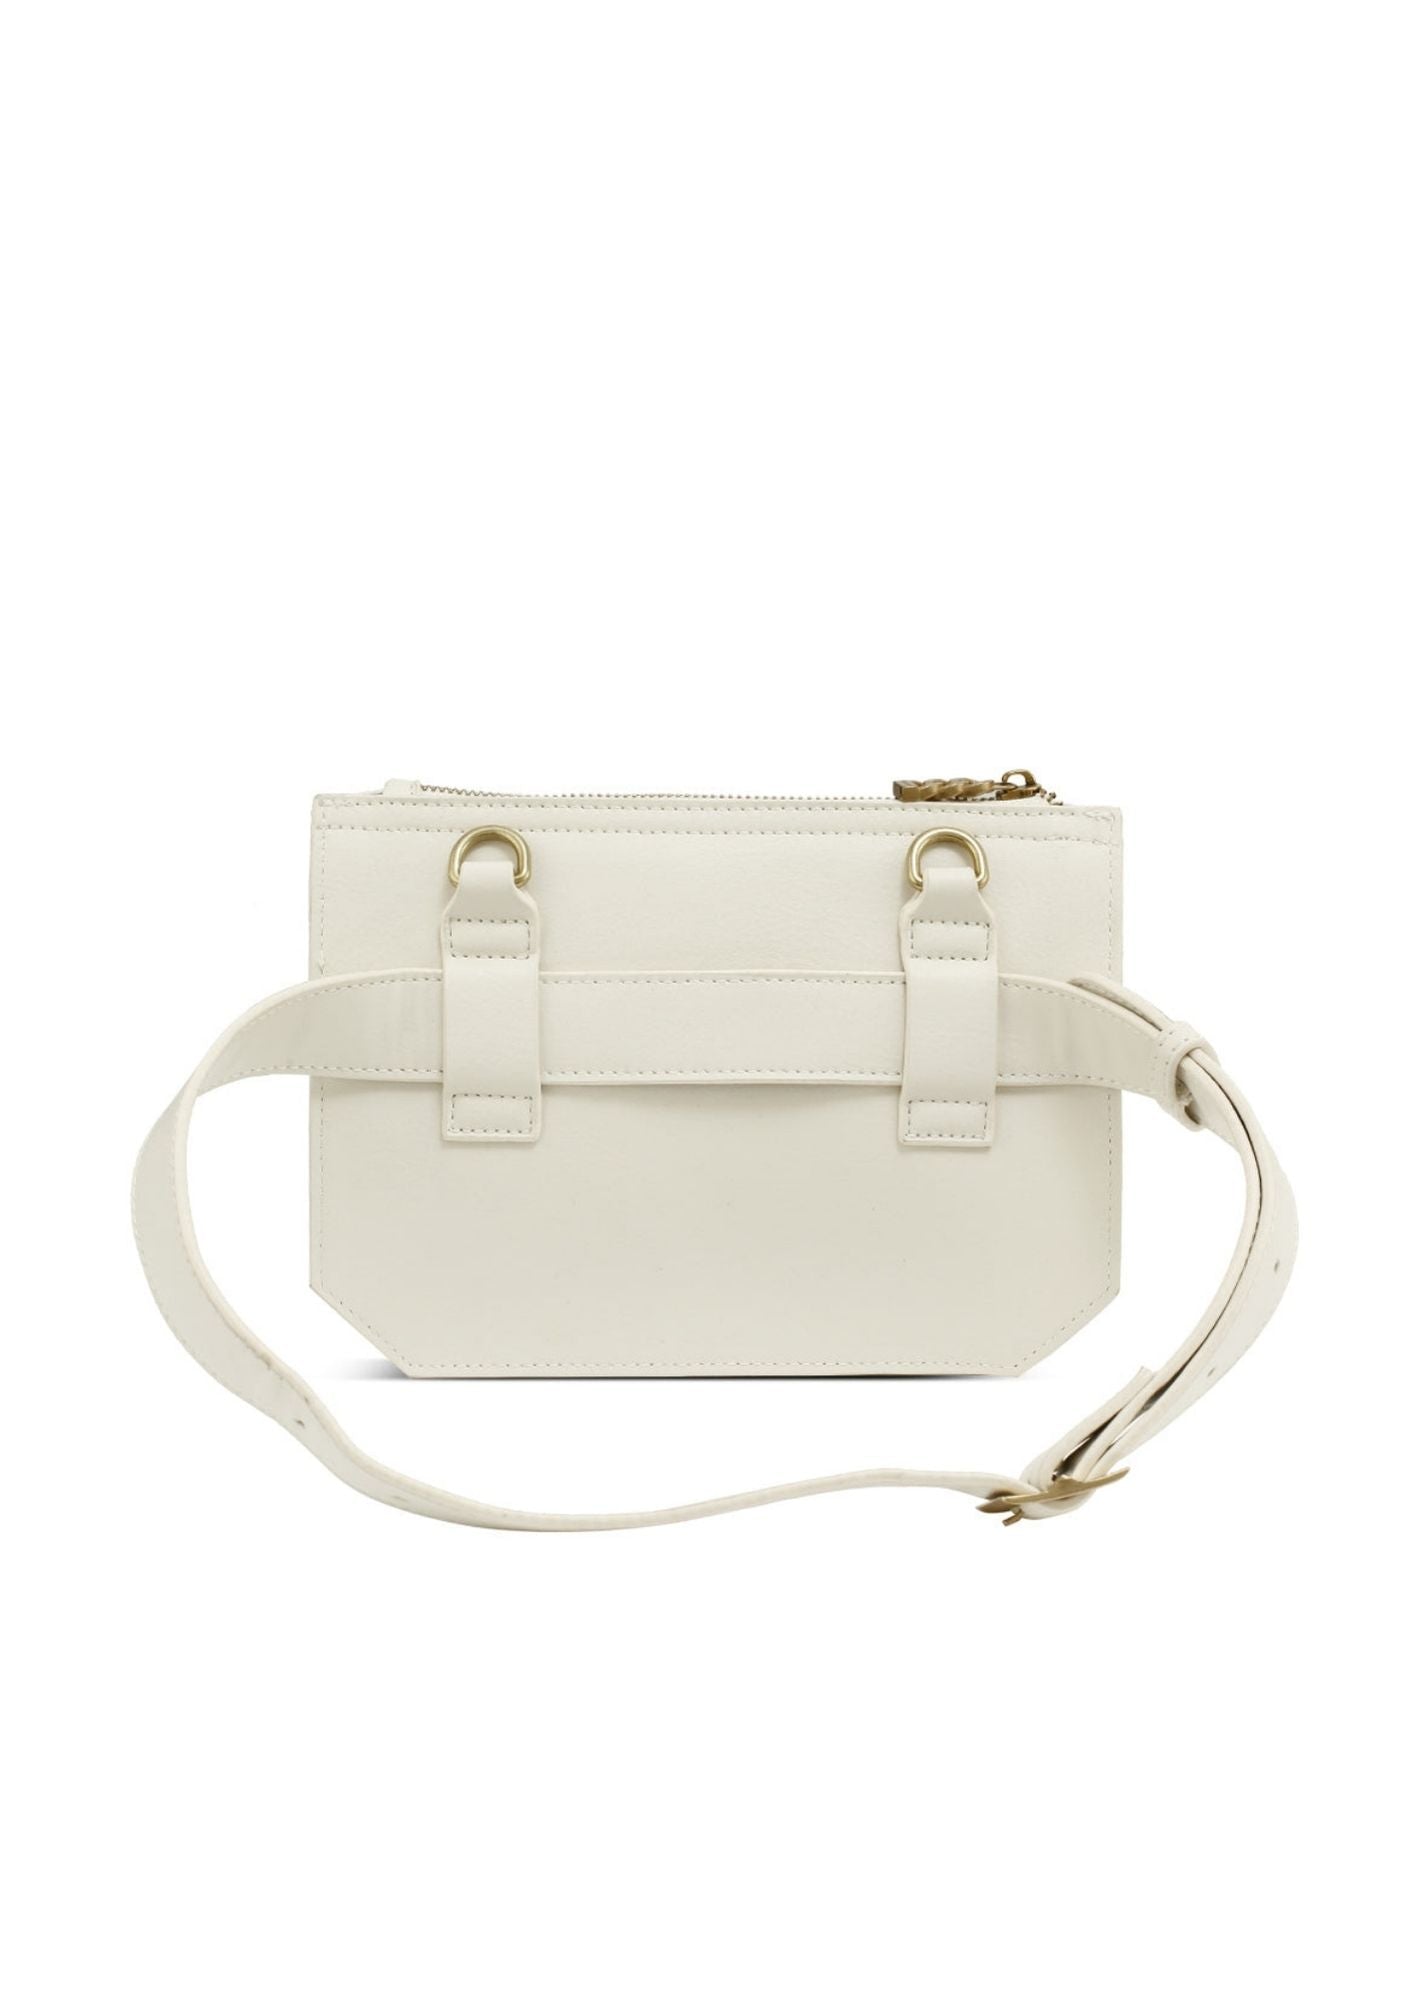 Everly Convertible Belt Bag Accessories Pixie Mood